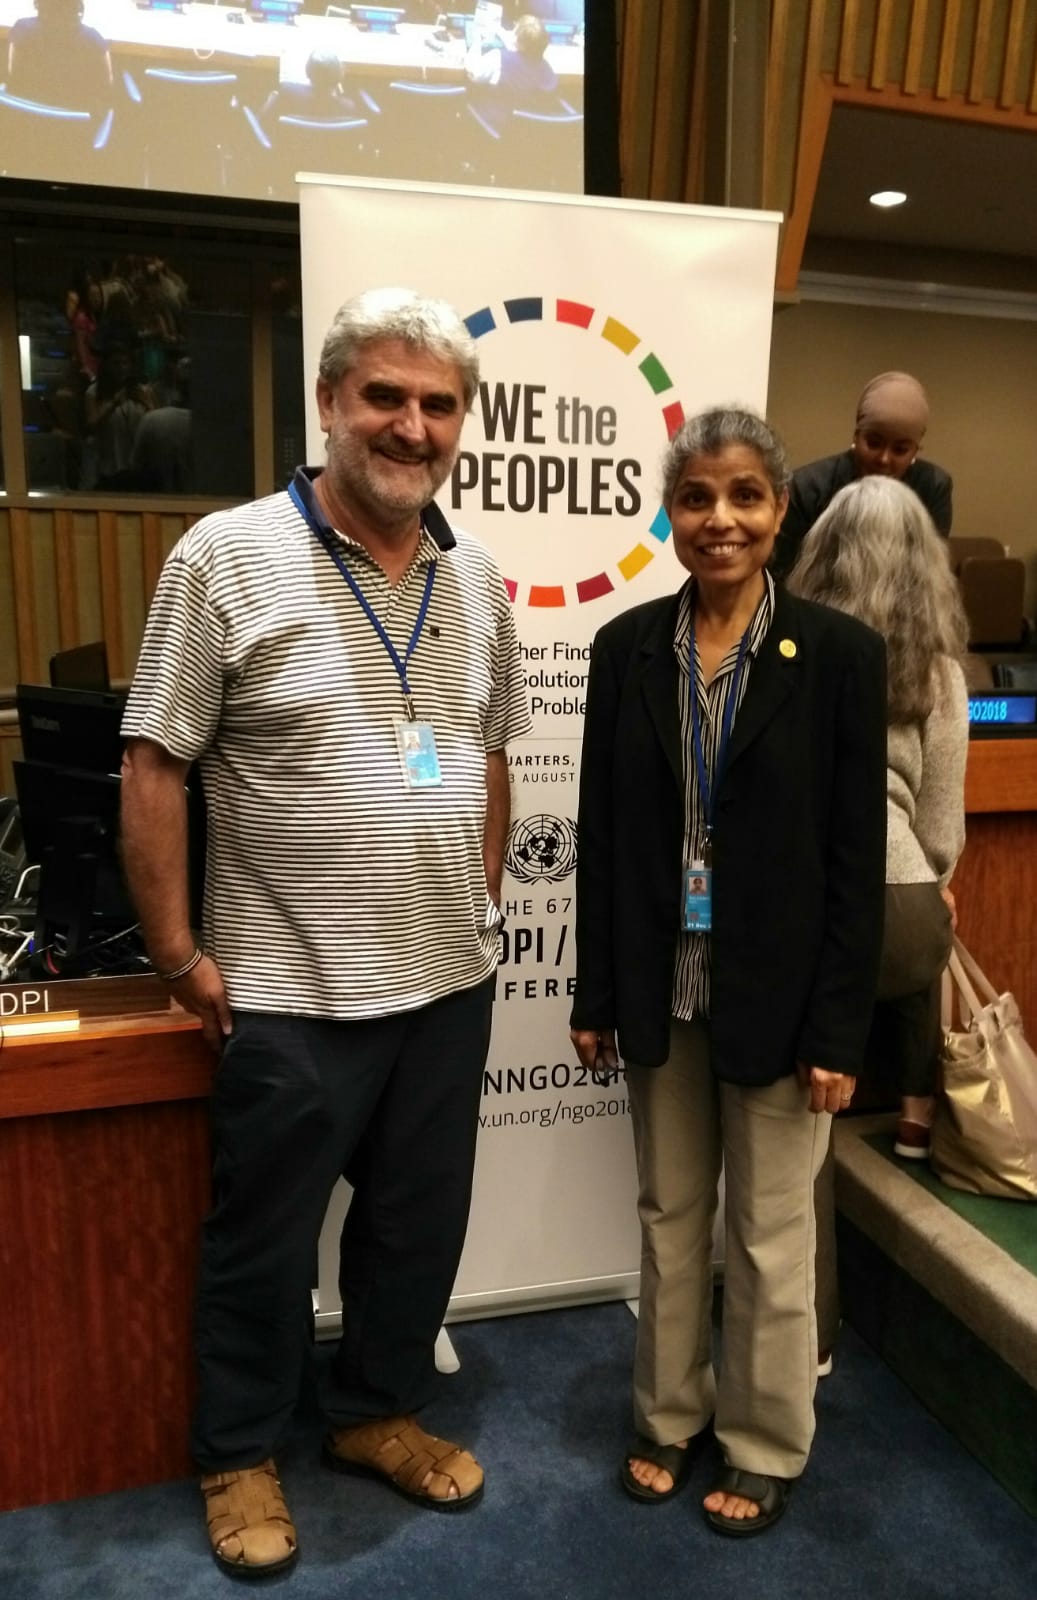 We the Peoples – UN Conference